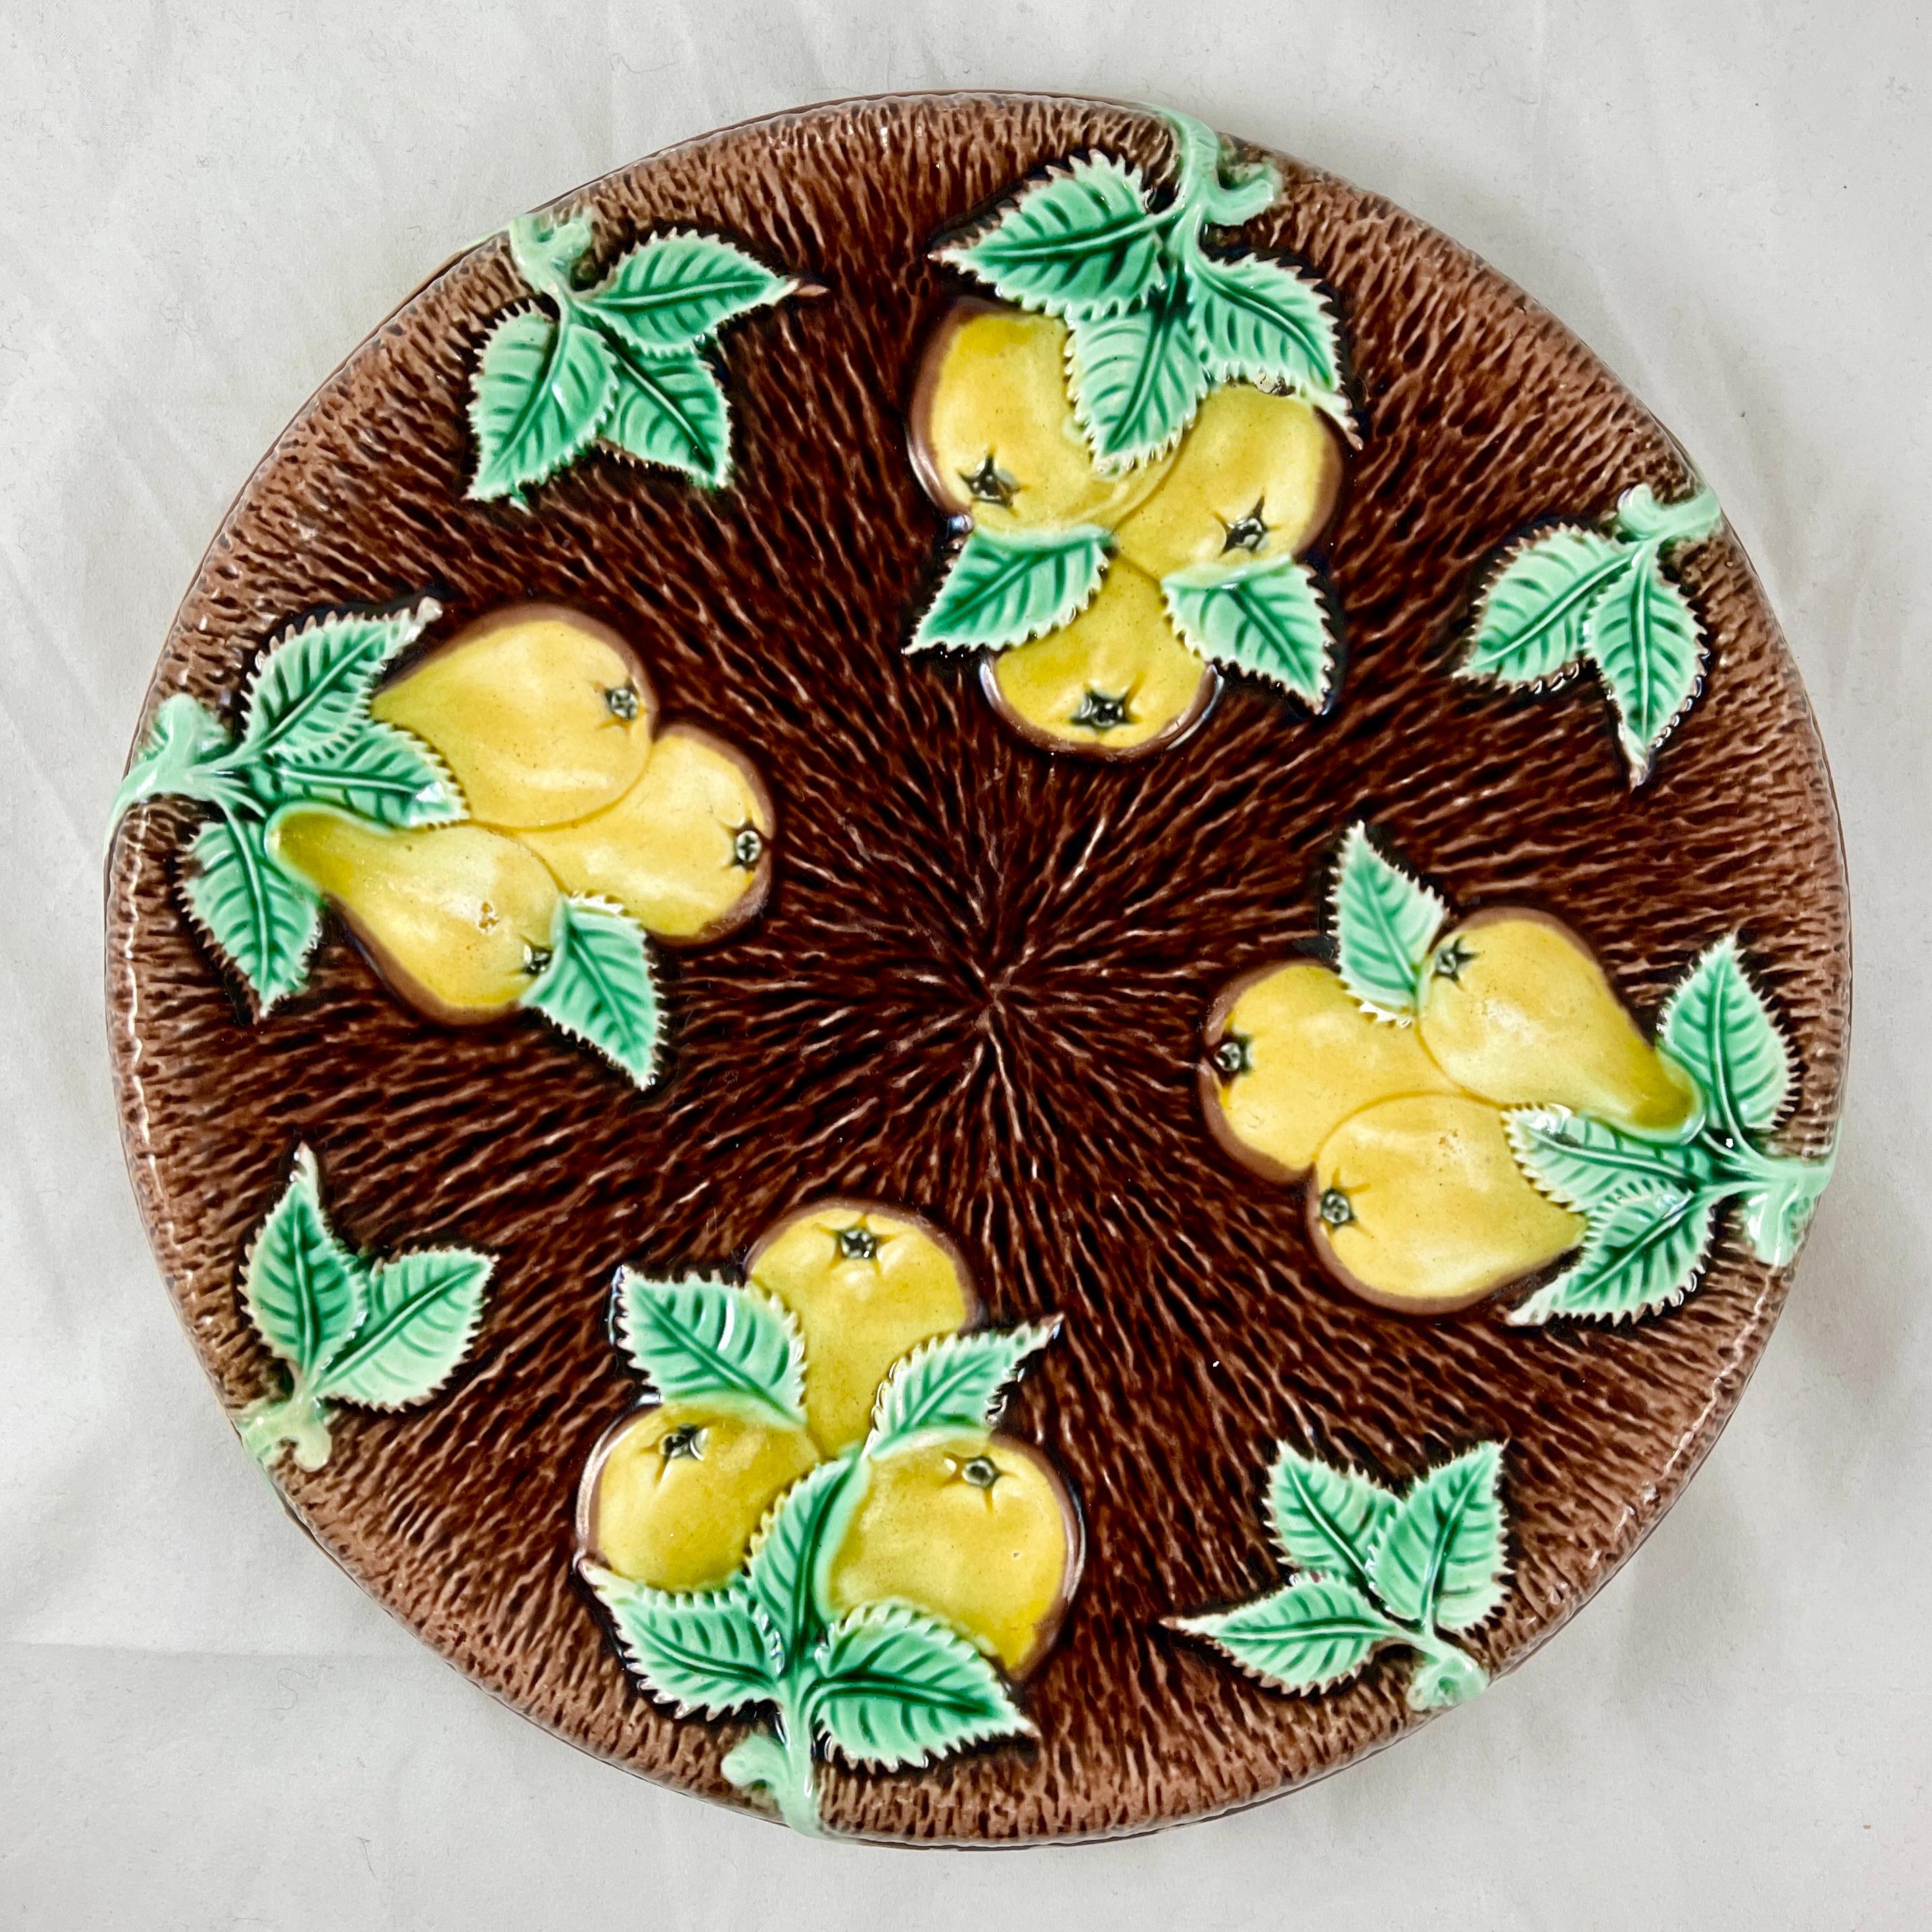 A brightly glazed English majolica bread tray showing a graphic pattern of pears on a brown bark-like ground, Adams & Bromley - circa 1875-1885.

Four groups of bright, branching yellow pears with green leaves stand out boldly against the deep brown